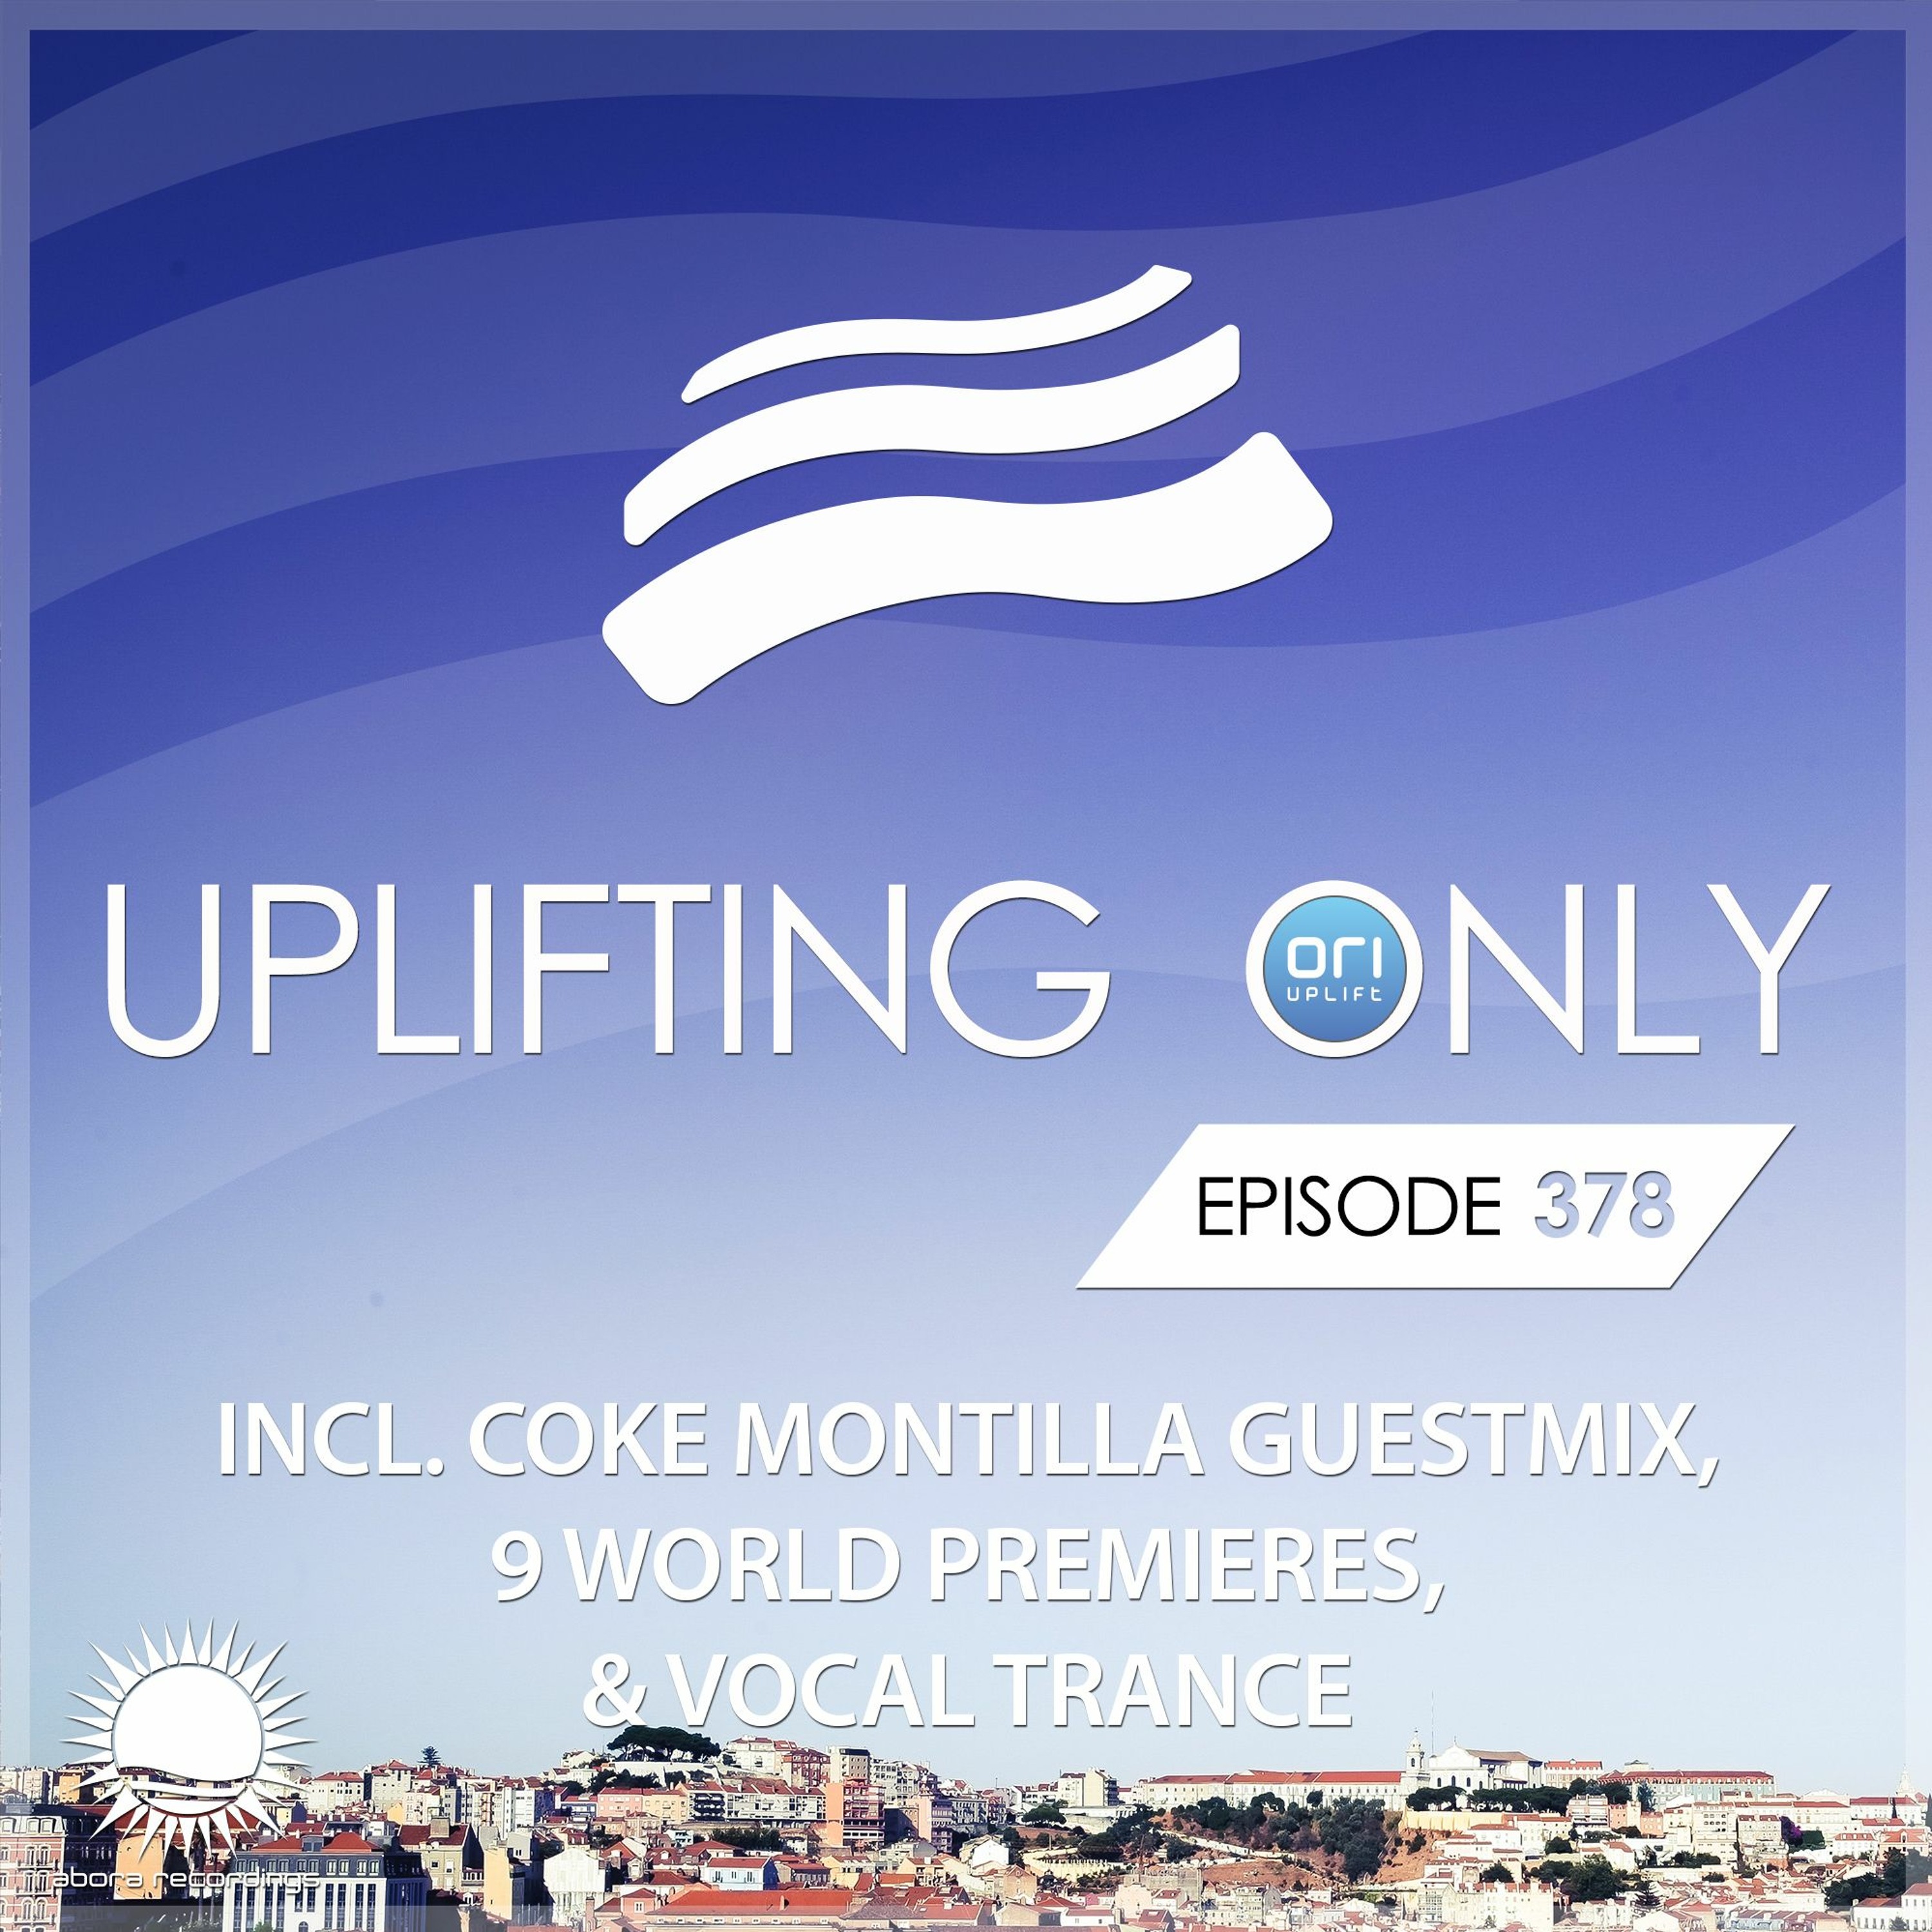 Uplifting Only 378 (May 7, 2020)(incl. Coke Montilla Guestmix) [incl. Vocal Trance]